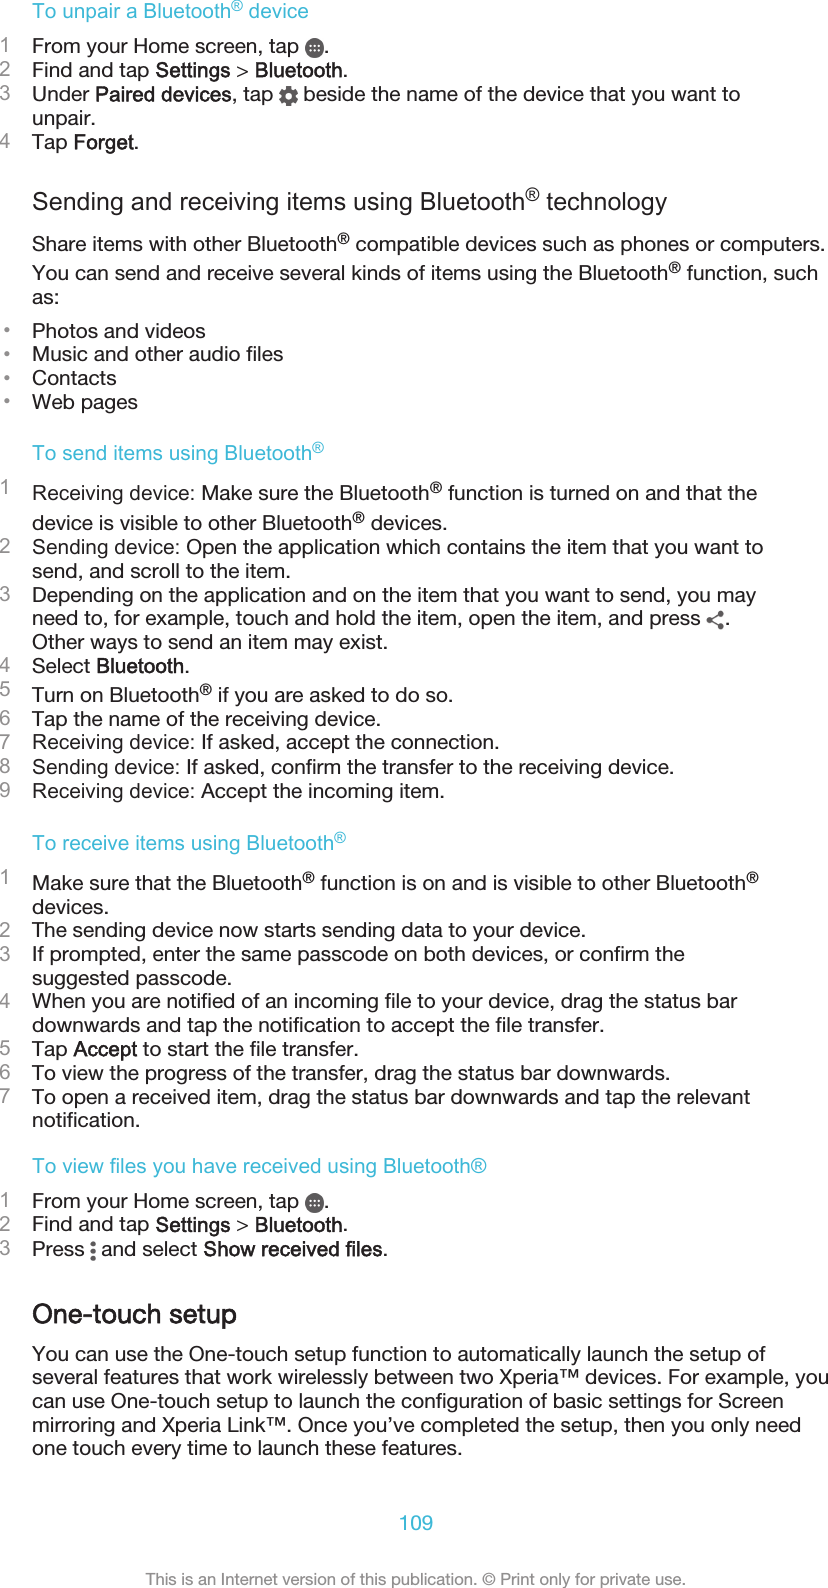 To unpair a Bluetooth® device1From your Home screen, tap  .2Find and tap Settings &gt; Bluetooth.3Under Paired devices, tap   beside the name of the device that you want tounpair.4Tap Forget.Sending and receiving items using Bluetooth® technologyShare items with other Bluetooth® compatible devices such as phones or computers.You can send and receive several kinds of items using the Bluetooth® function, suchas:•Photos and videos•Music and other audio files•Contacts•Web pagesTo send items using Bluetooth®1Receiving device: Make sure the Bluetooth® function is turned on and that thedevice is visible to other Bluetooth® devices.2Sending device: Open the application which contains the item that you want tosend, and scroll to the item.3Depending on the application and on the item that you want to send, you mayneed to, for example, touch and hold the item, open the item, and press  .Other ways to send an item may exist.4Select Bluetooth.5Turn on Bluetooth® if you are asked to do so.6Tap the name of the receiving device.7Receiving device: If asked, accept the connection.8Sending device: If asked, confirm the transfer to the receiving device.9Receiving device: Accept the incoming item.To receive items using Bluetooth®1Make sure that the Bluetooth® function is on and is visible to other Bluetooth®devices.2The sending device now starts sending data to your device.3If prompted, enter the same passcode on both devices, or confirm thesuggested passcode.4When you are notified of an incoming file to your device, drag the status bardownwards and tap the notification to accept the file transfer.5Tap Accept to start the file transfer.6To view the progress of the transfer, drag the status bar downwards.7To open a received item, drag the status bar downwards and tap the relevantnotification.To view files you have received using Bluetooth®1From your Home screen, tap  .2Find and tap Settings &gt; Bluetooth.3Press   and select Show received files.One-touch setupYou can use the One-touch setup function to automatically launch the setup ofseveral features that work wirelessly between two Xperia™ devices. For example, youcan use One-touch setup to launch the configuration of basic settings for Screenmirroring and Xperia Link™. Once you’ve completed the setup, then you only needone touch every time to launch these features.109This is an Internet version of this publication. © Print only for private use.